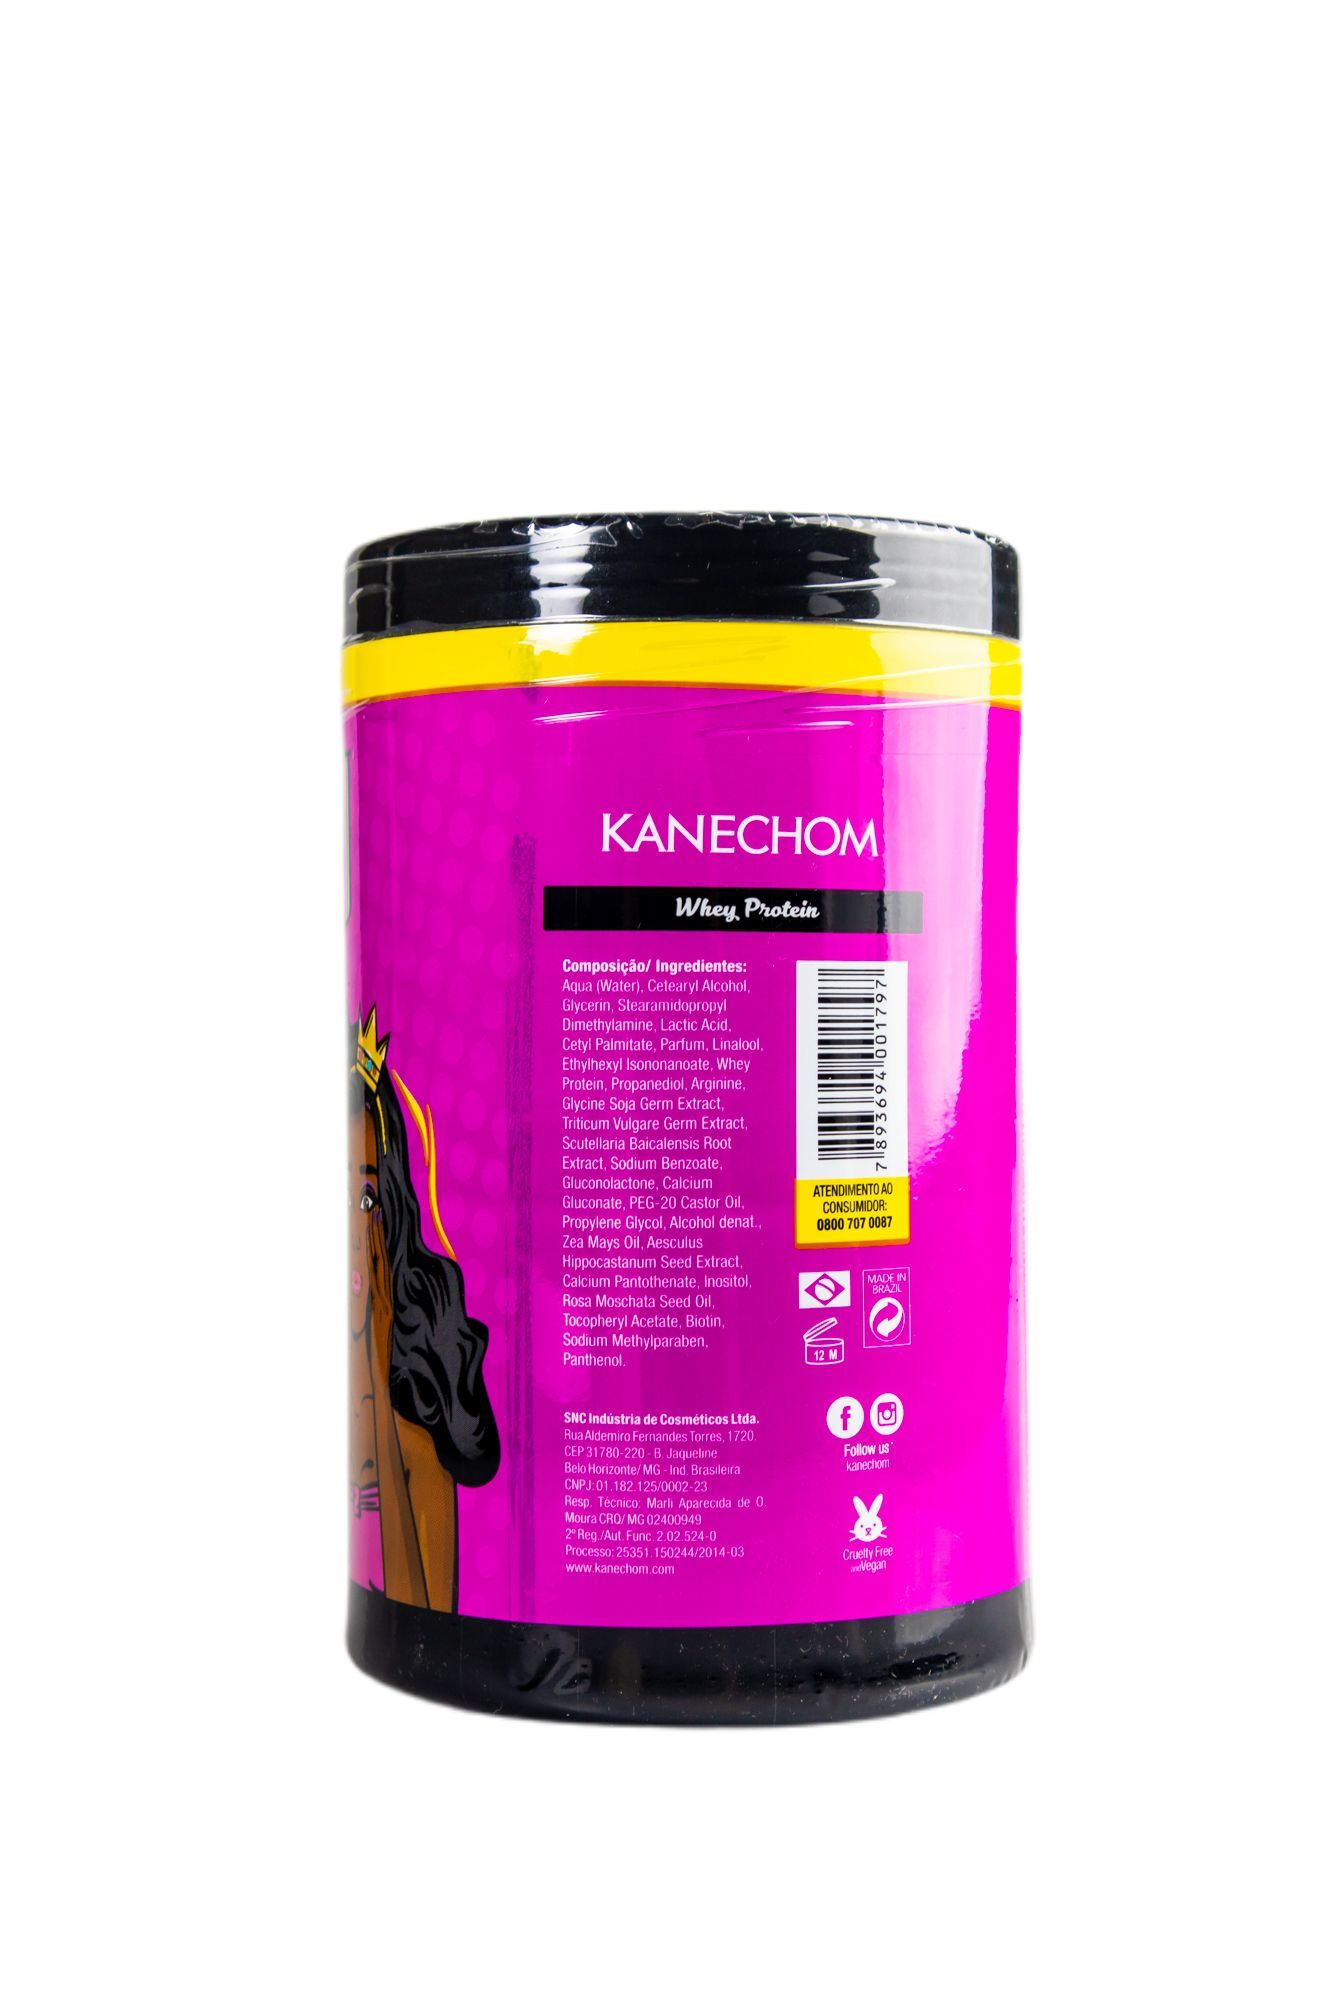 Kanechom Home Care Bombou Whey Protein Vitamins Hair Fortifying Growth Combing Cream 1Kg - Kanechom